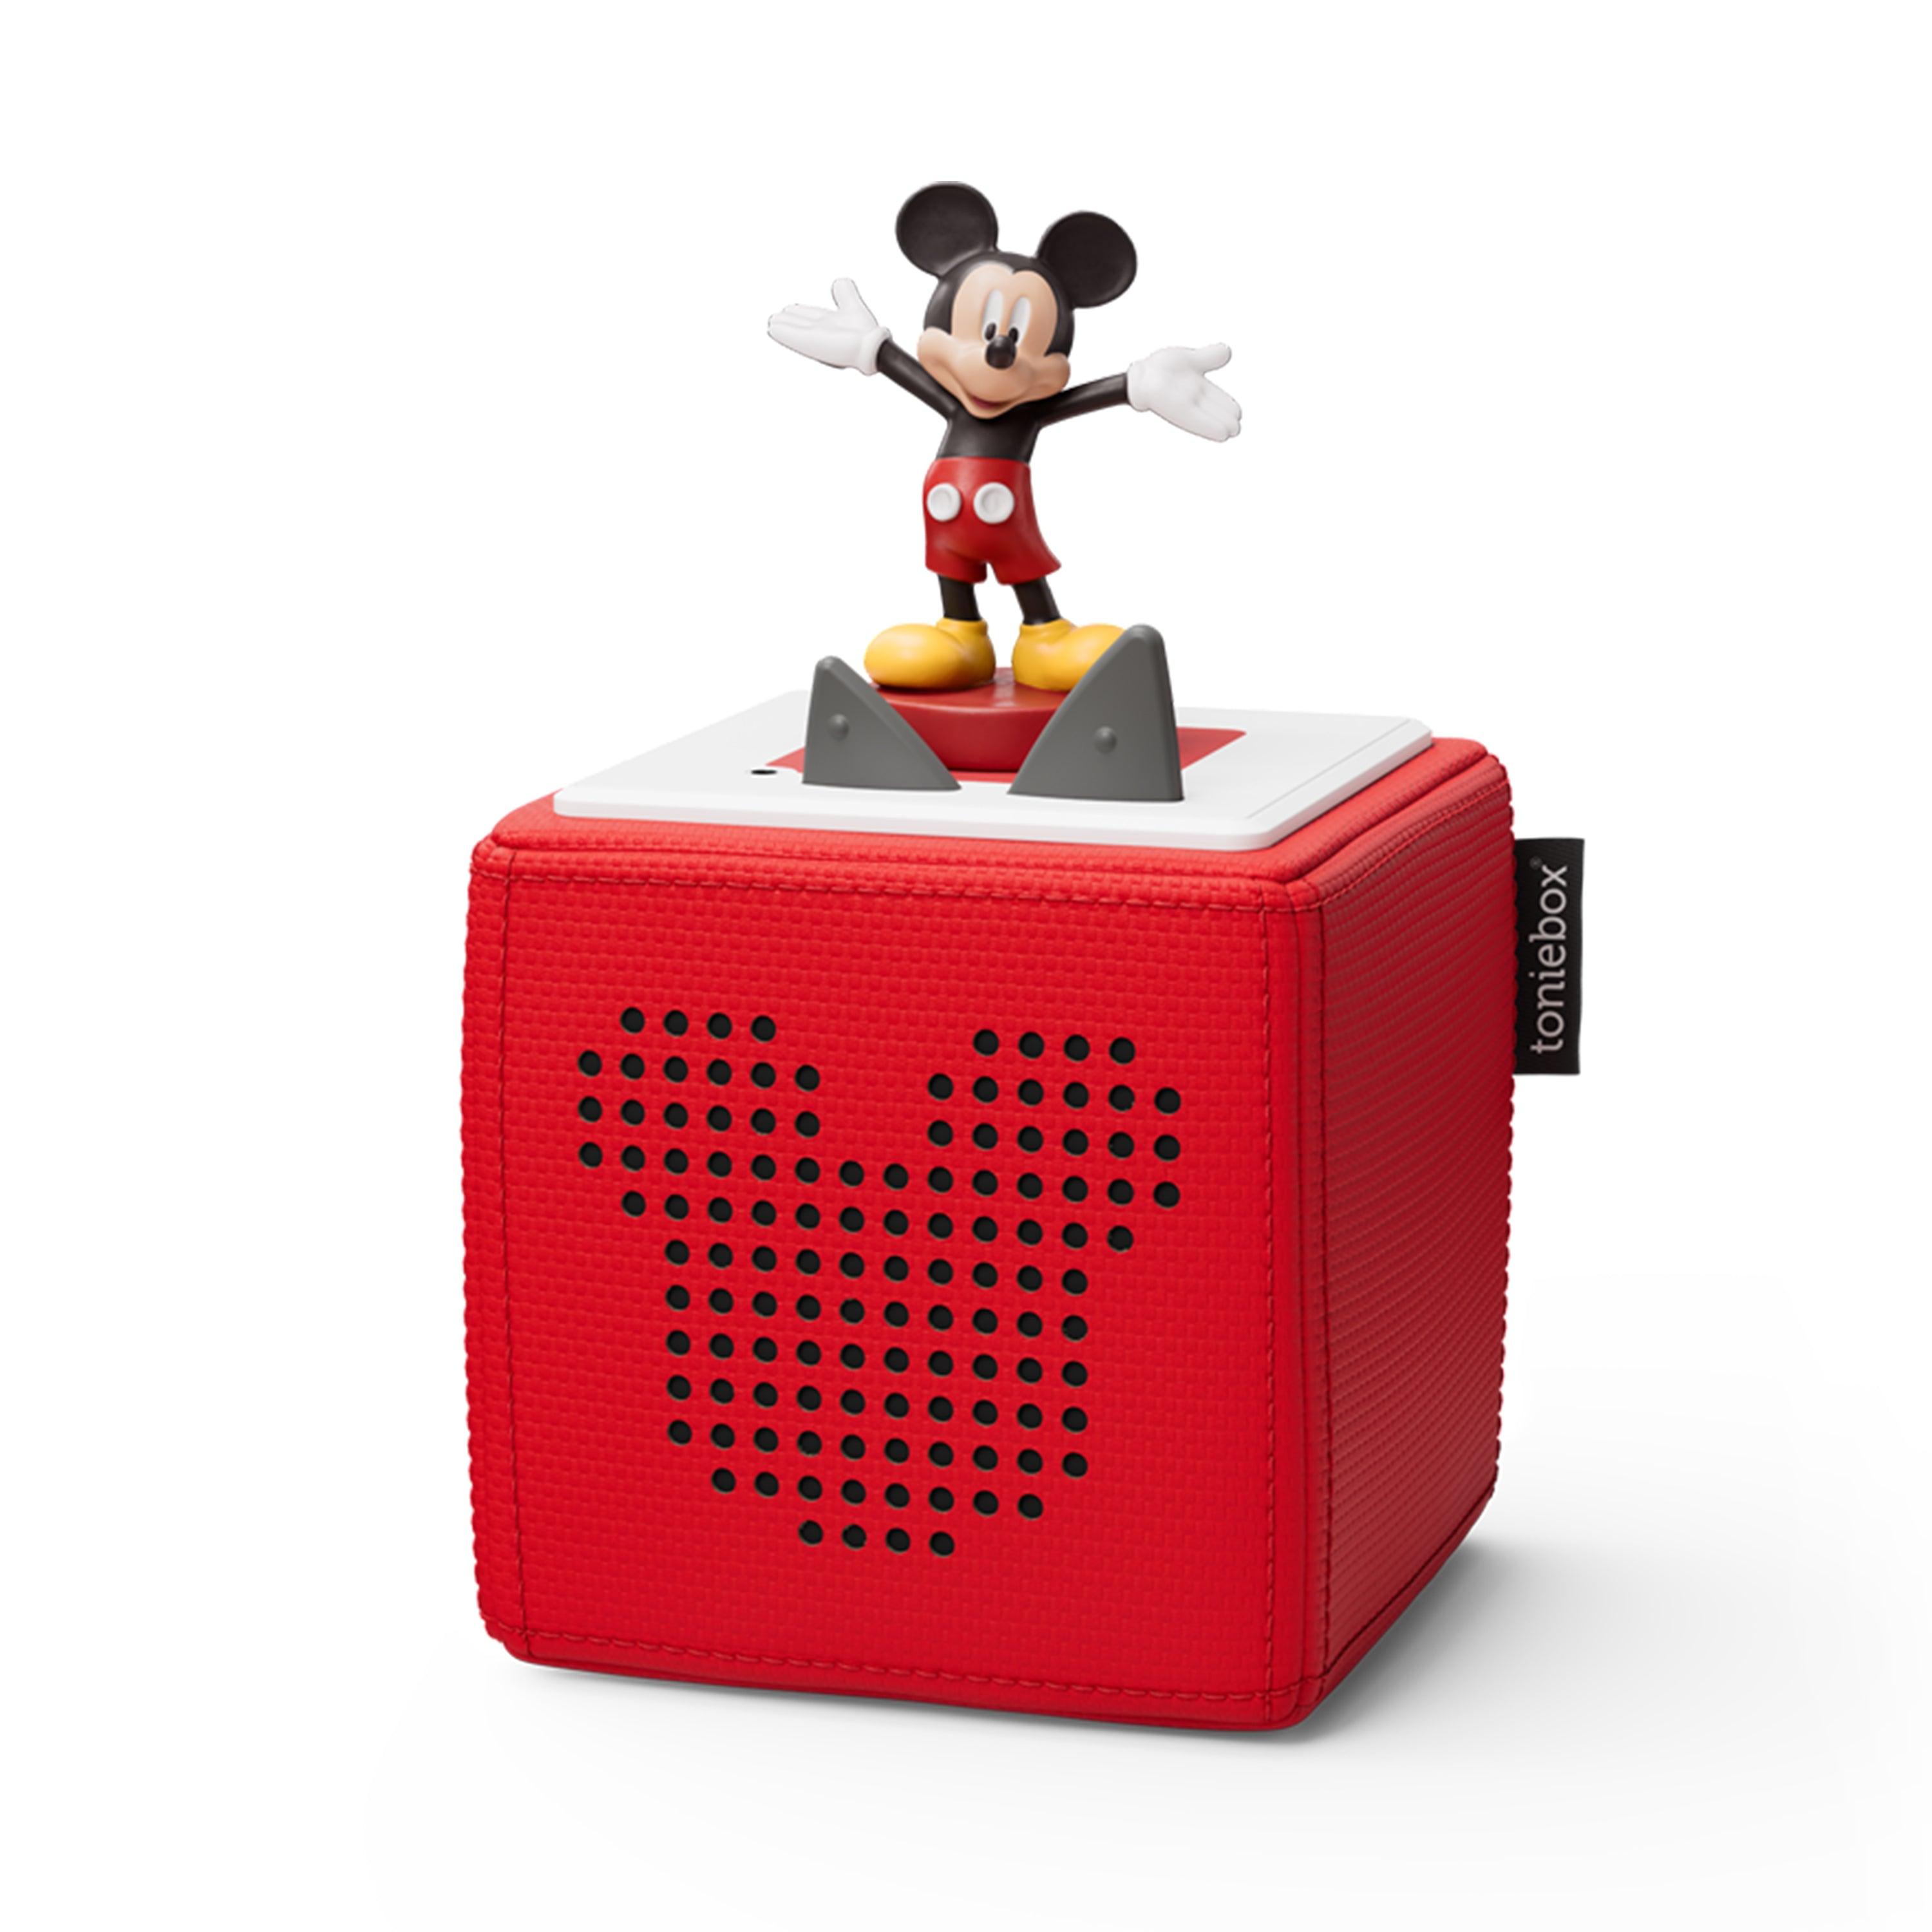 Tonies Limited Edition Mickey Mouse Toniebox Starter Set w/ free Headp –  Why and Whale